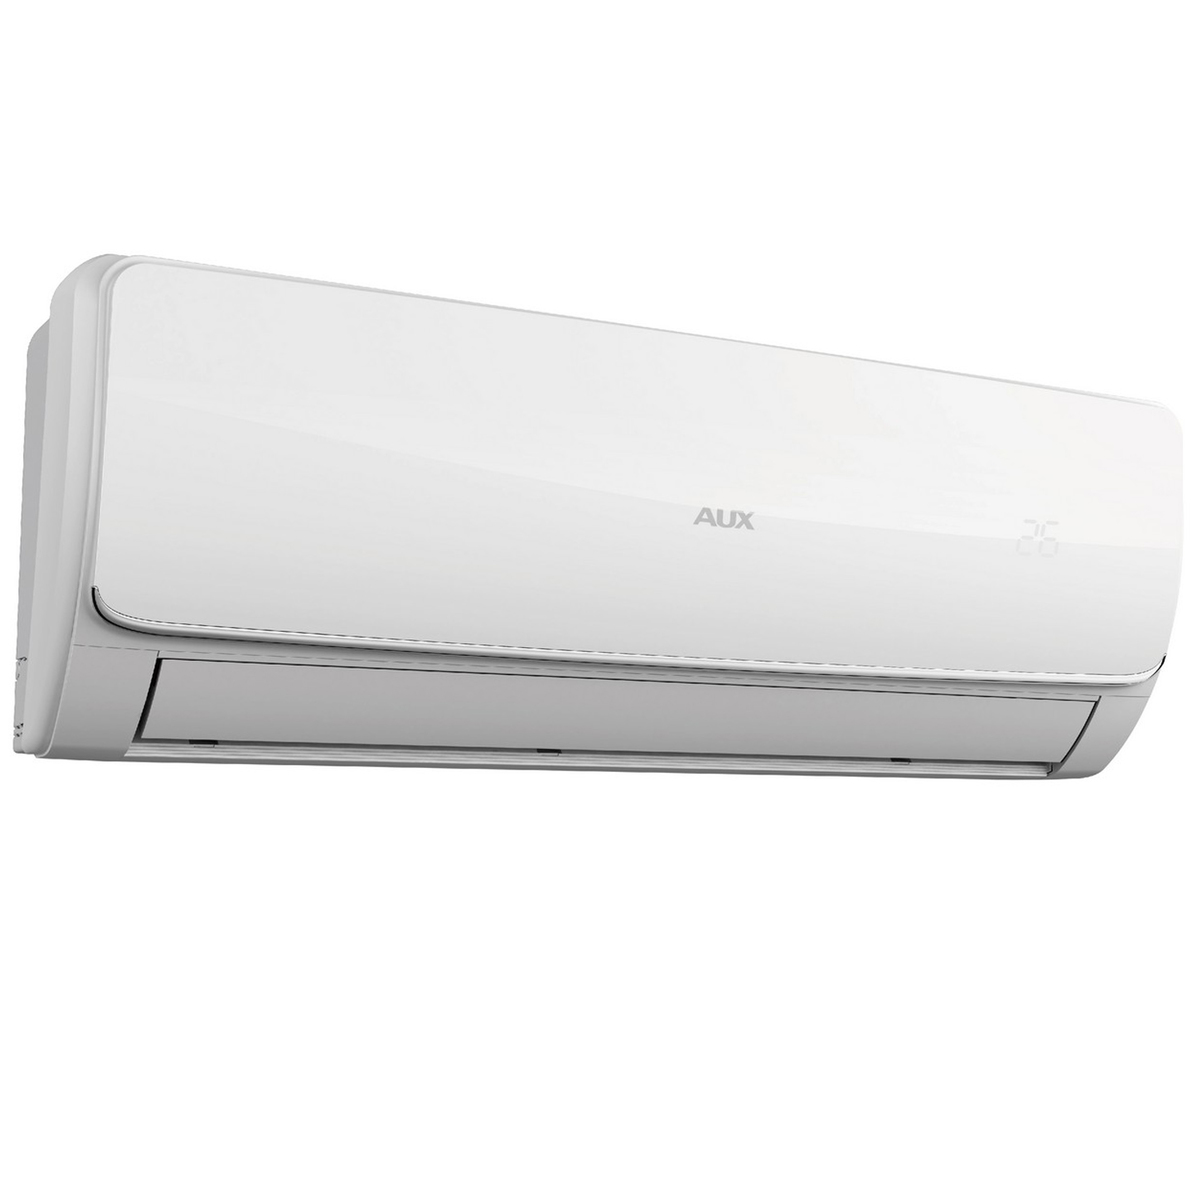 buy-aux-split-air-conditioner-with-inverter-technology-astwh12a4-1ton